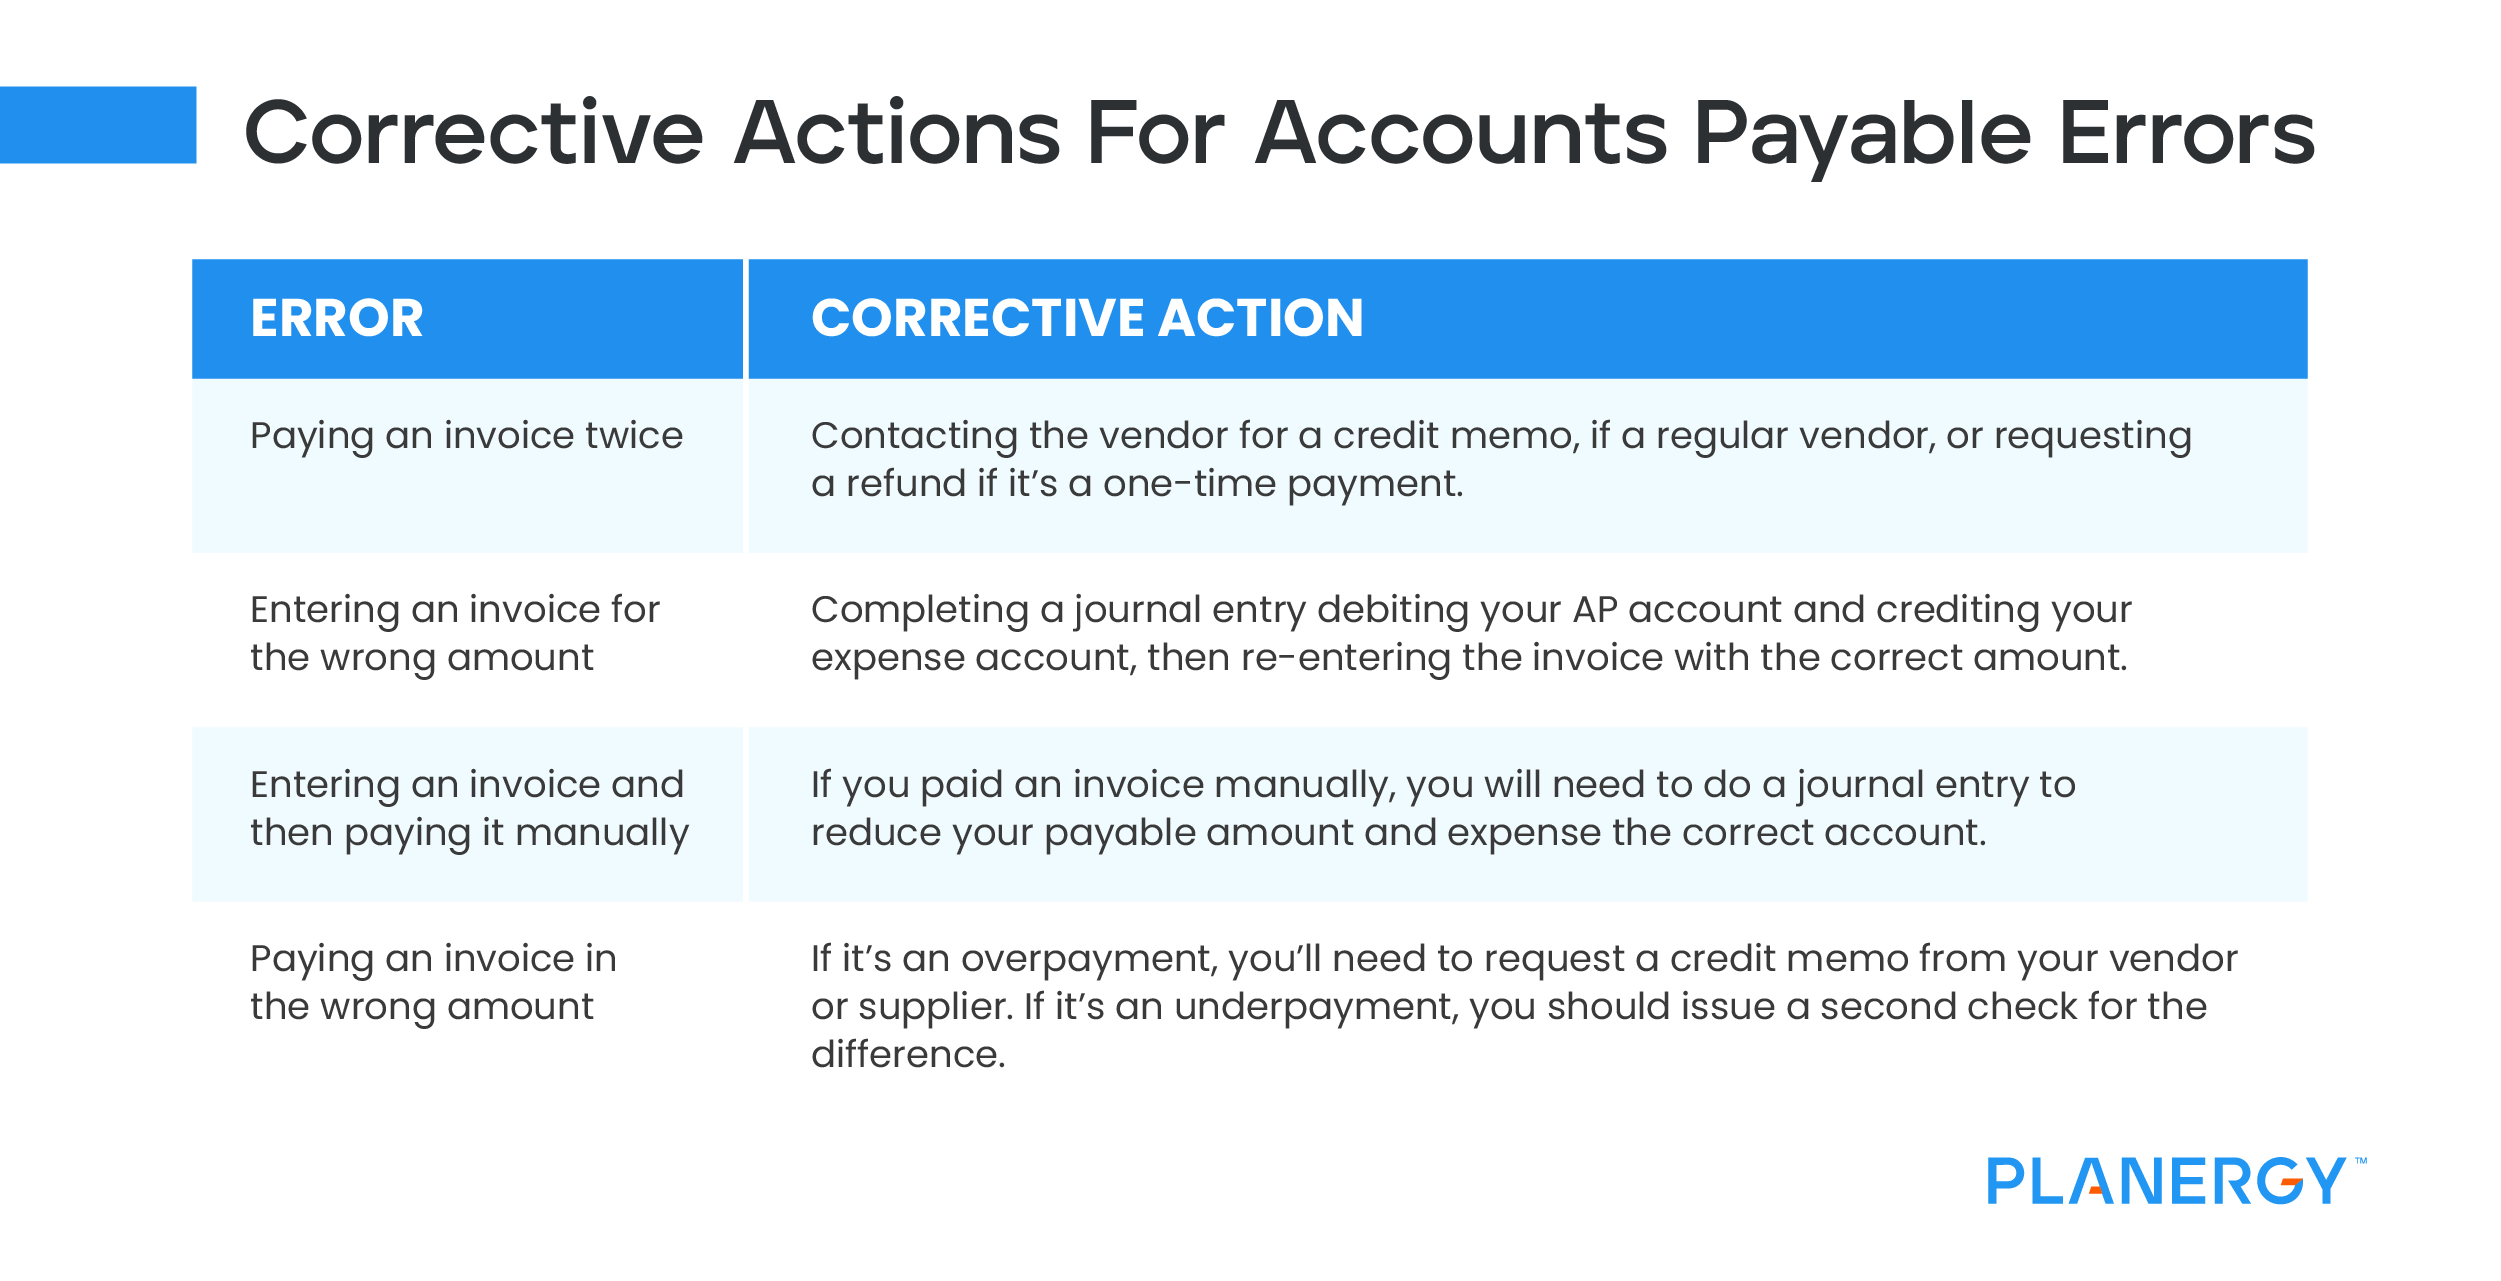 Corrective Actions for Accounts Payable Errors